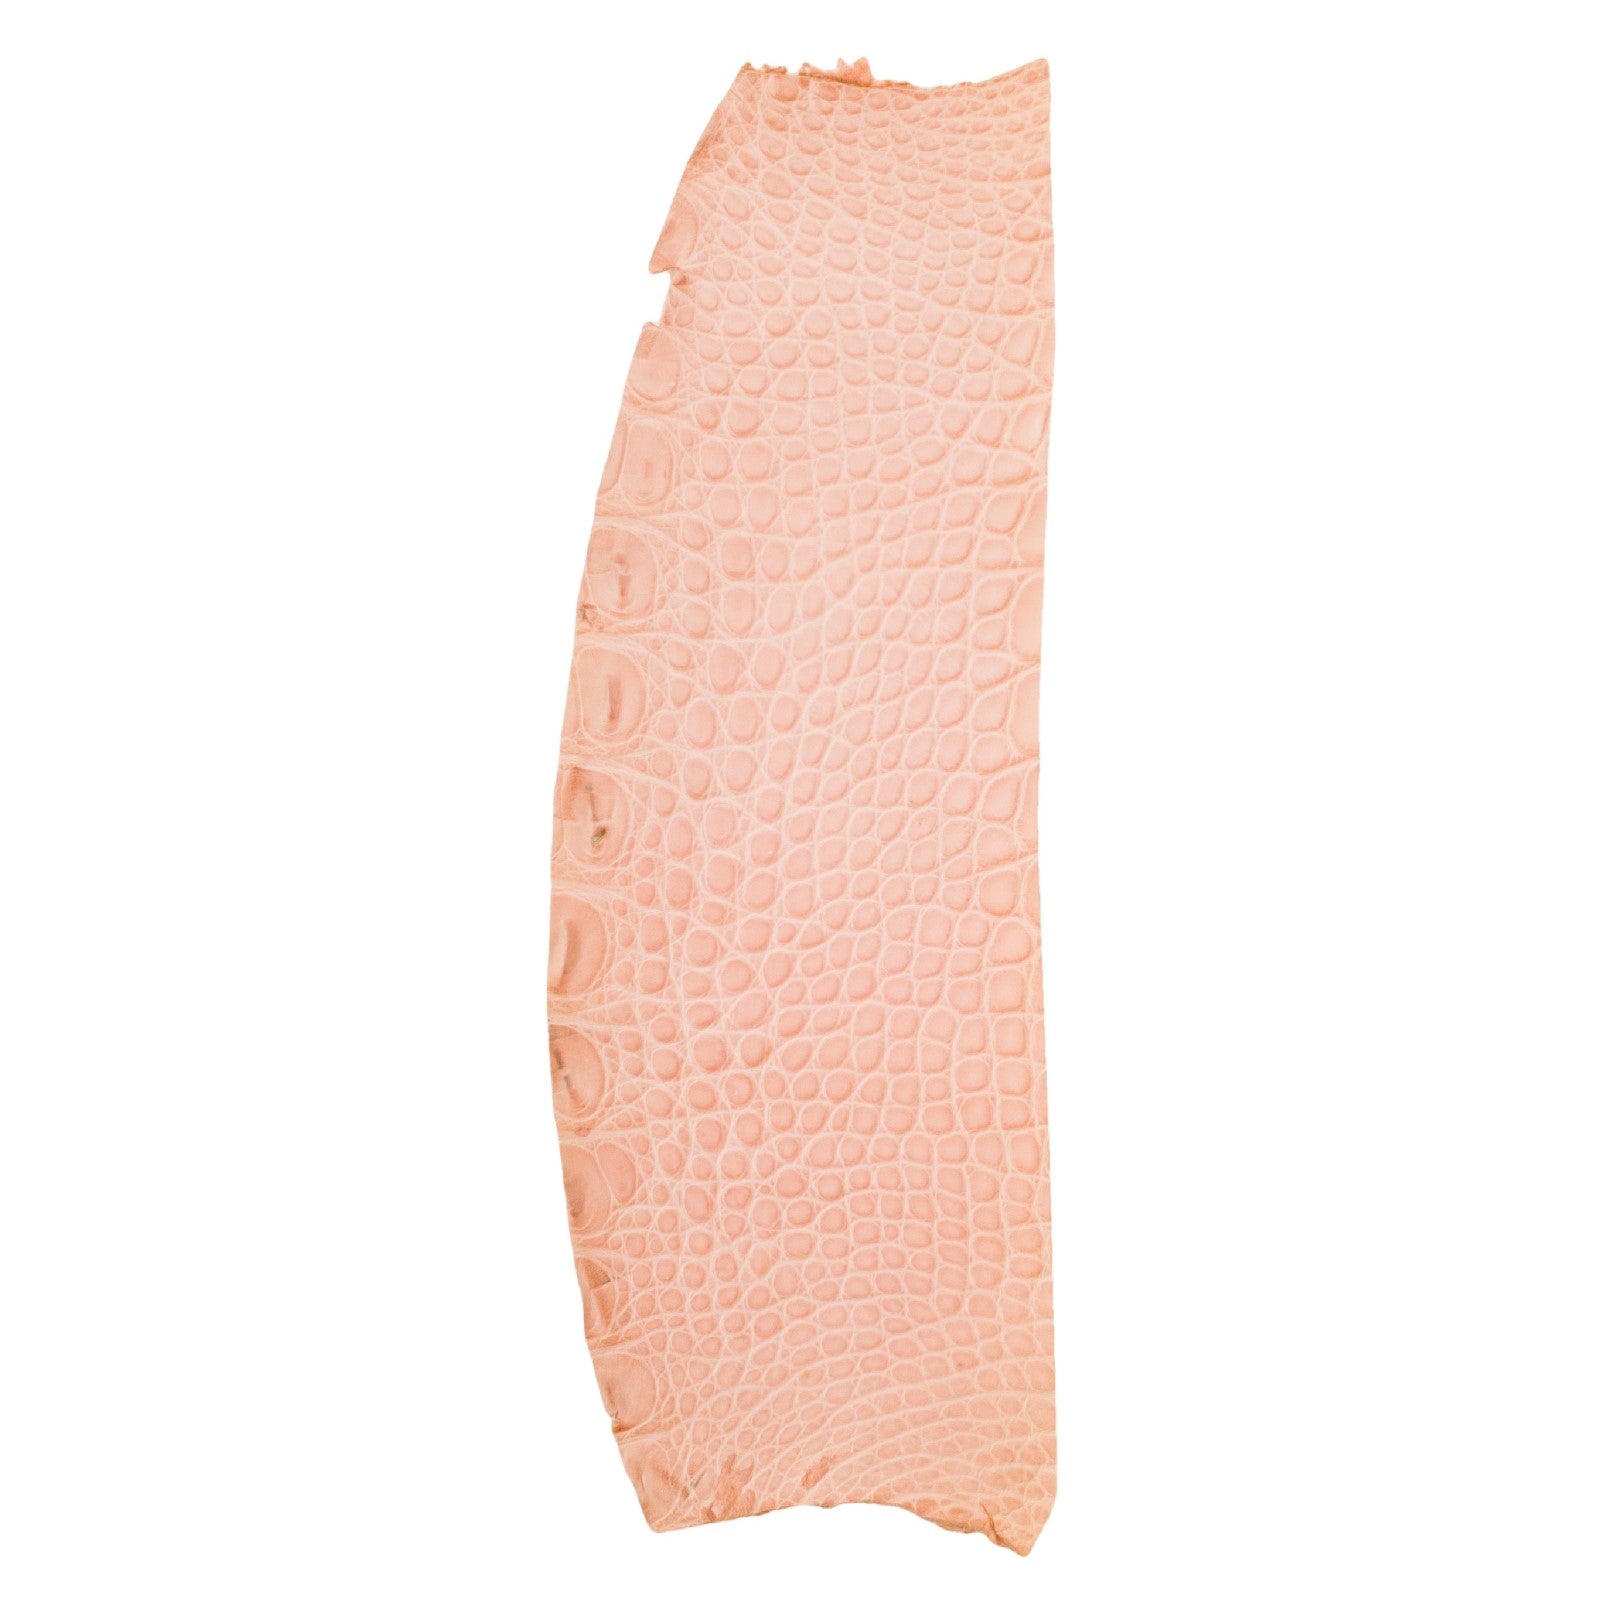 Alligator Skin Flank Various Colors Genuine Hide, Peachy Pink | The Leather Guy